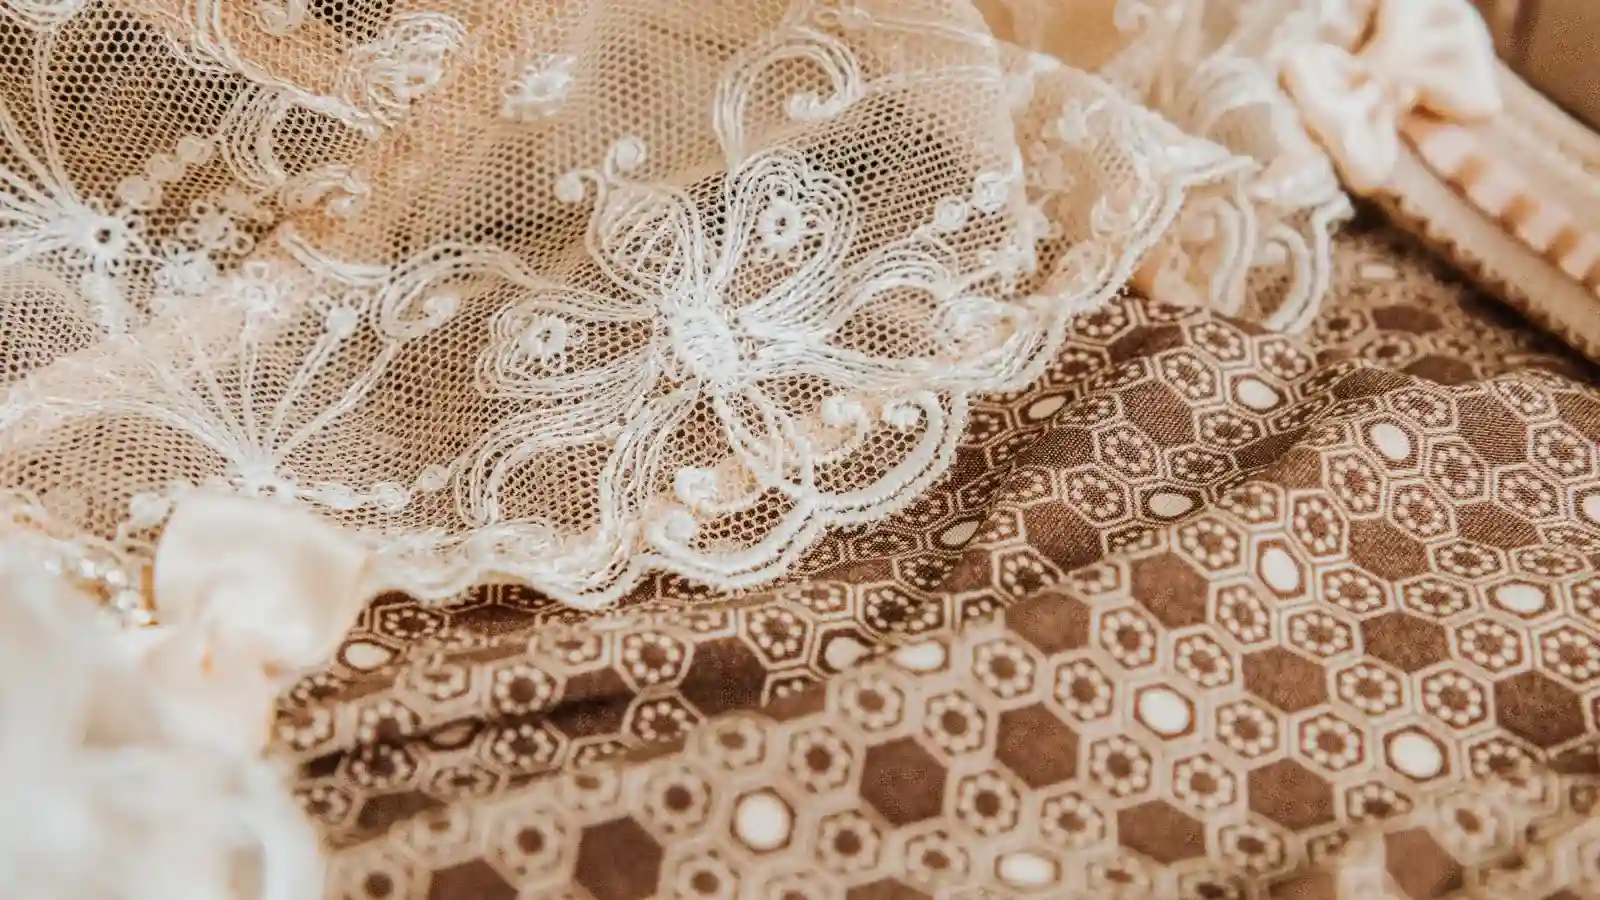 How to Sew a Lace Overlay: a Detailed Tutorial